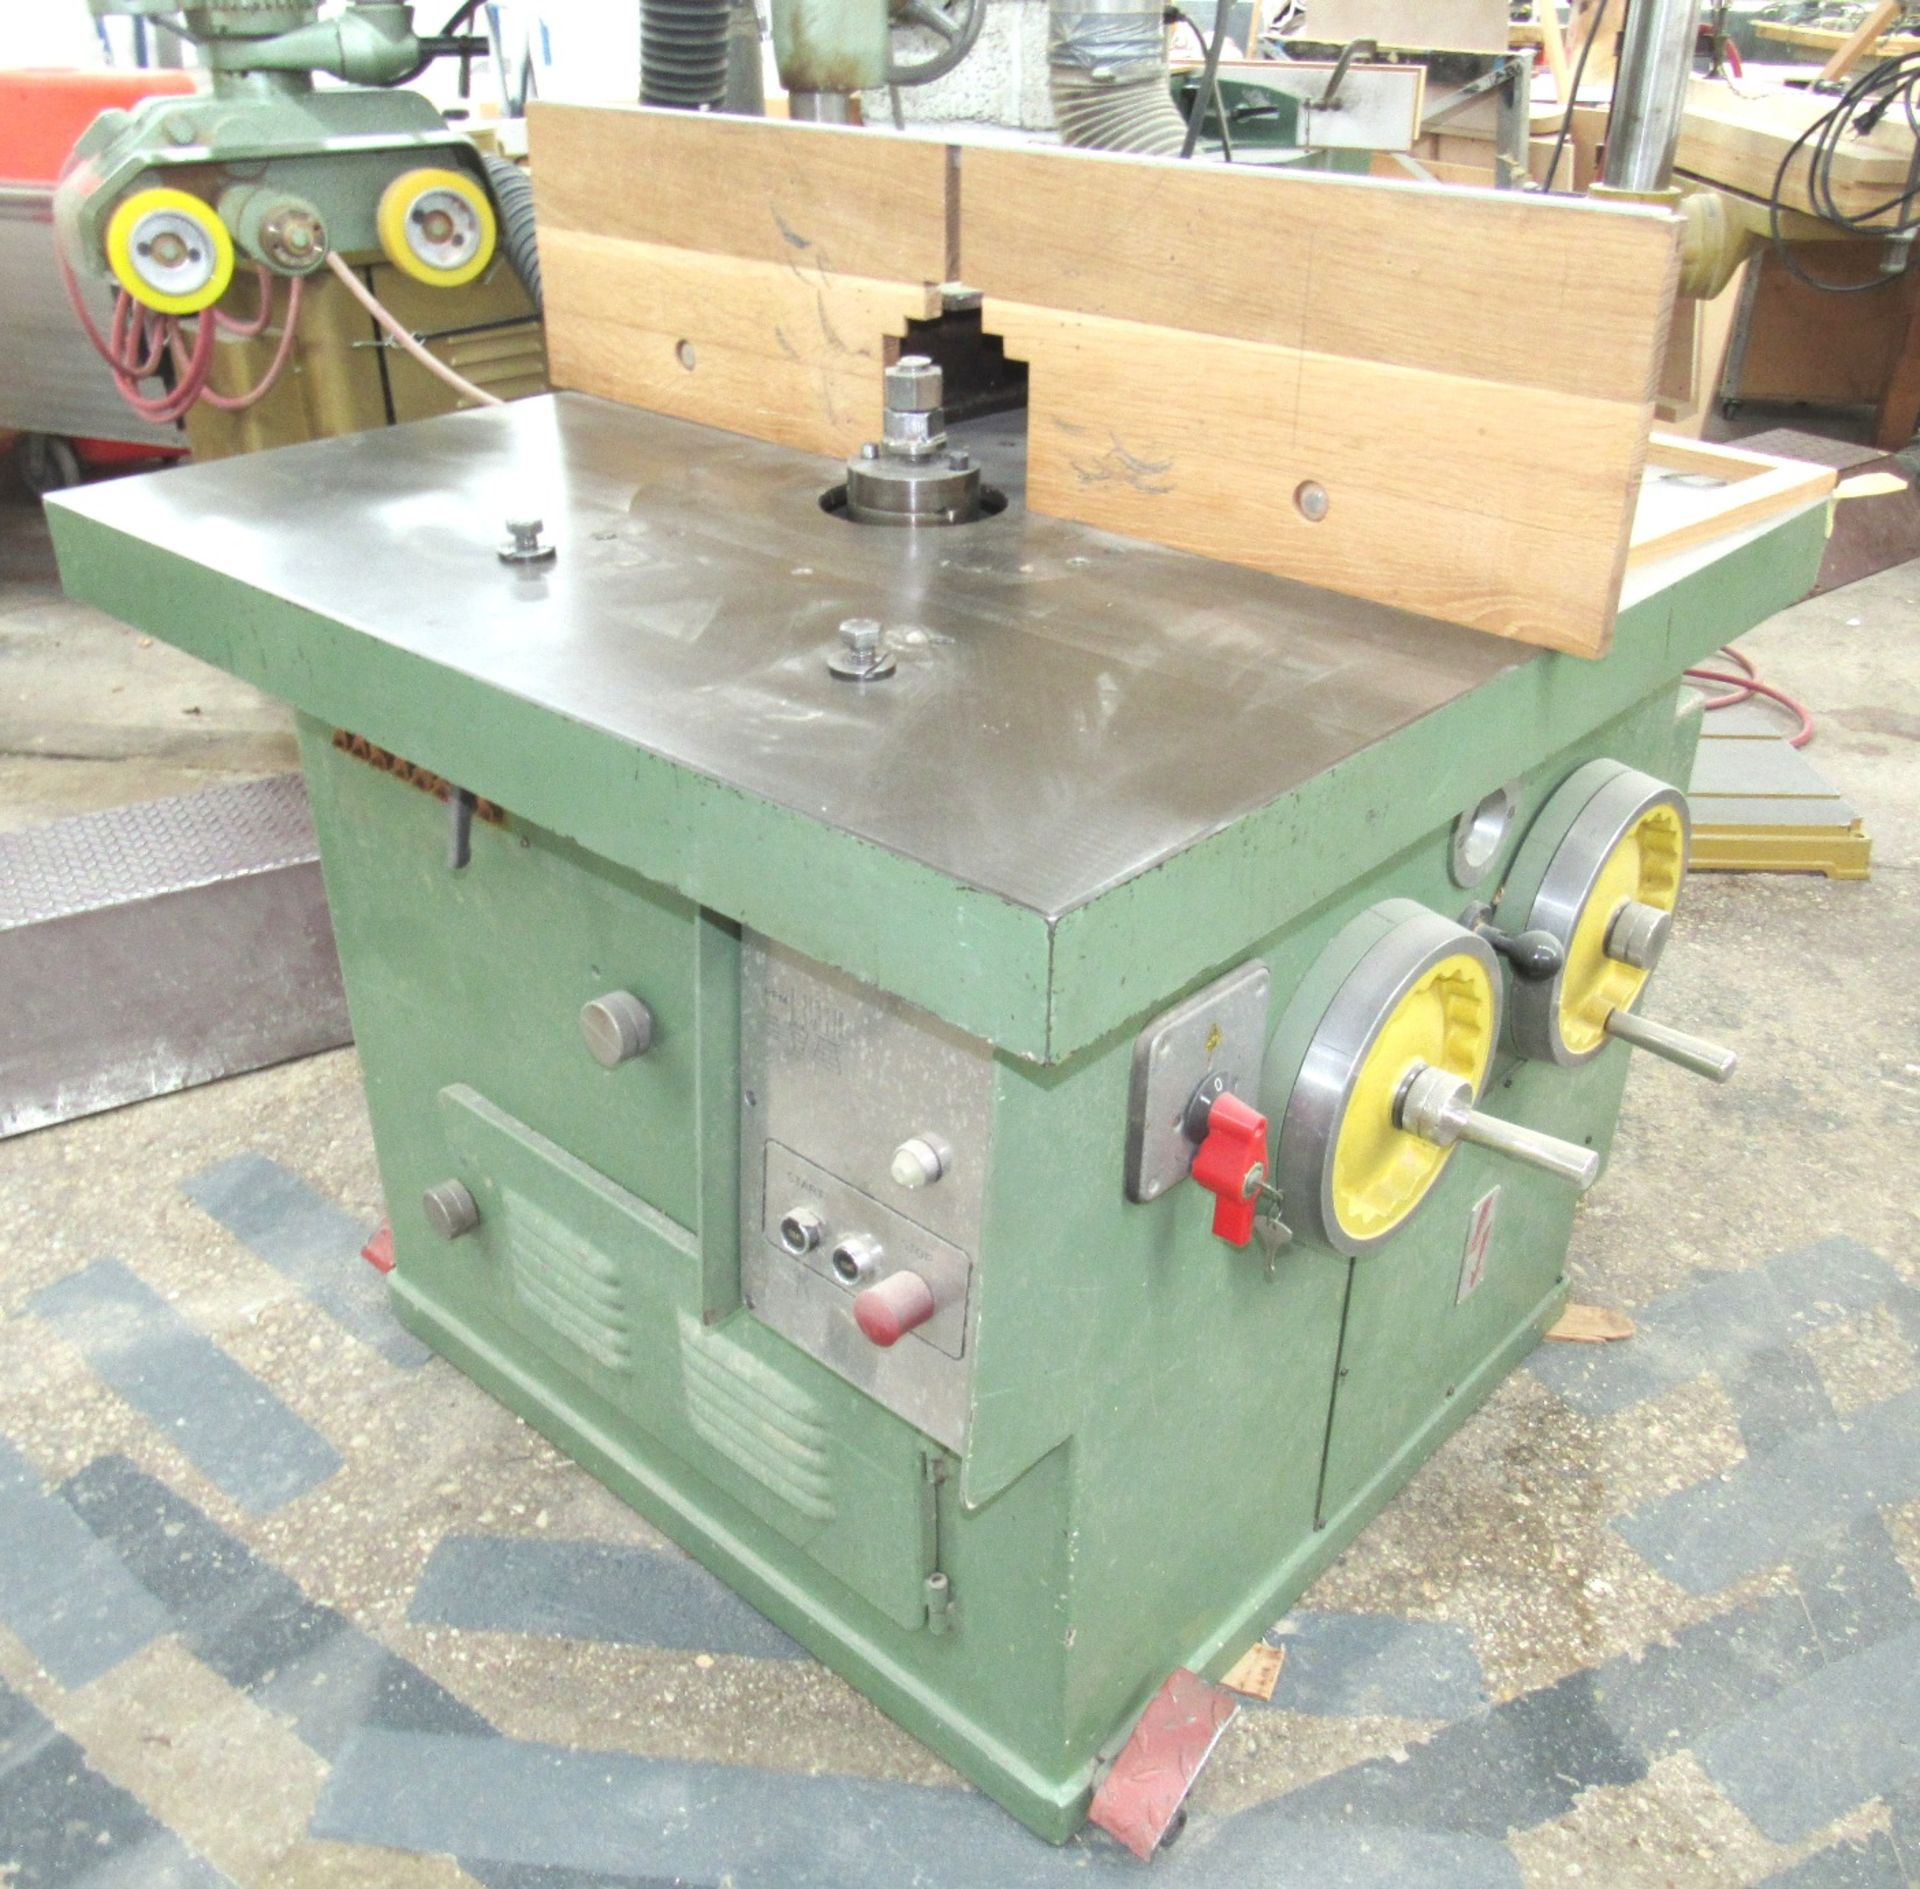 Gomad Mod. DFFA-5 Shaper - Variable Speed 4000 - 10,000 RPM, 1.25" Spindle Dia., Tilting Arbor,